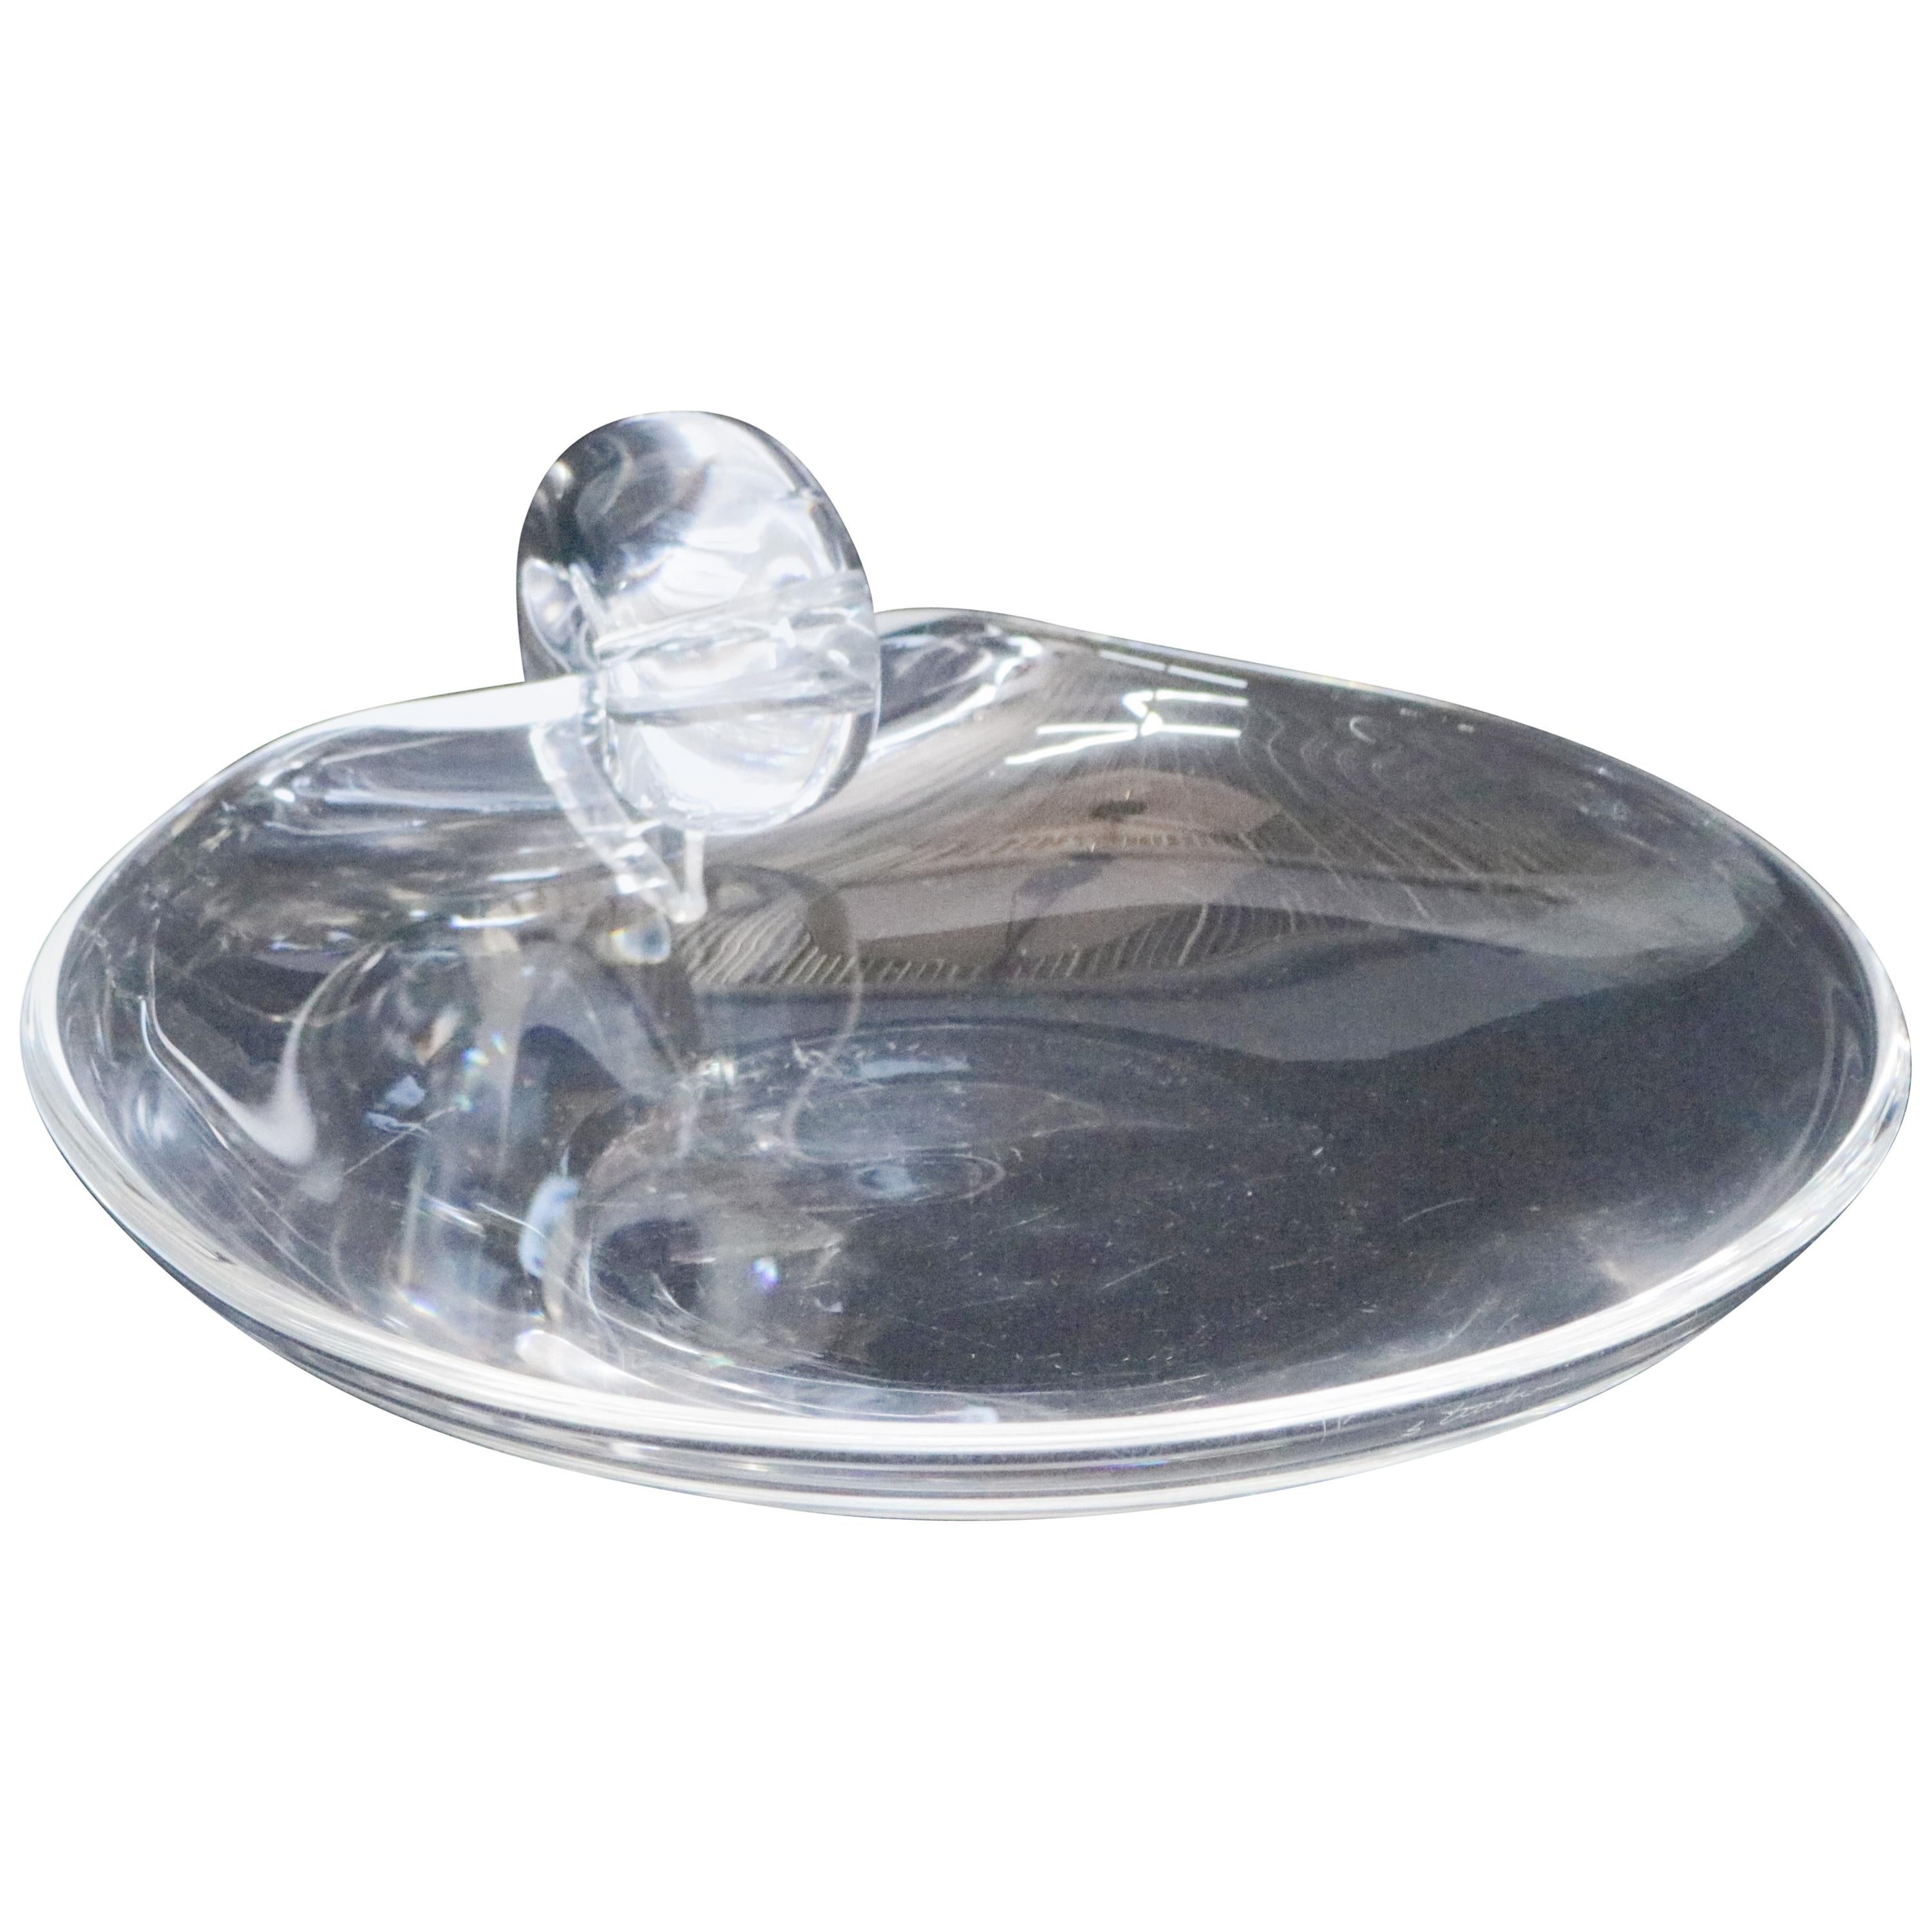 Steuben Crystal Sloping Bowl Art Glass Candy Dish, Classic Scroll Handle, Signed